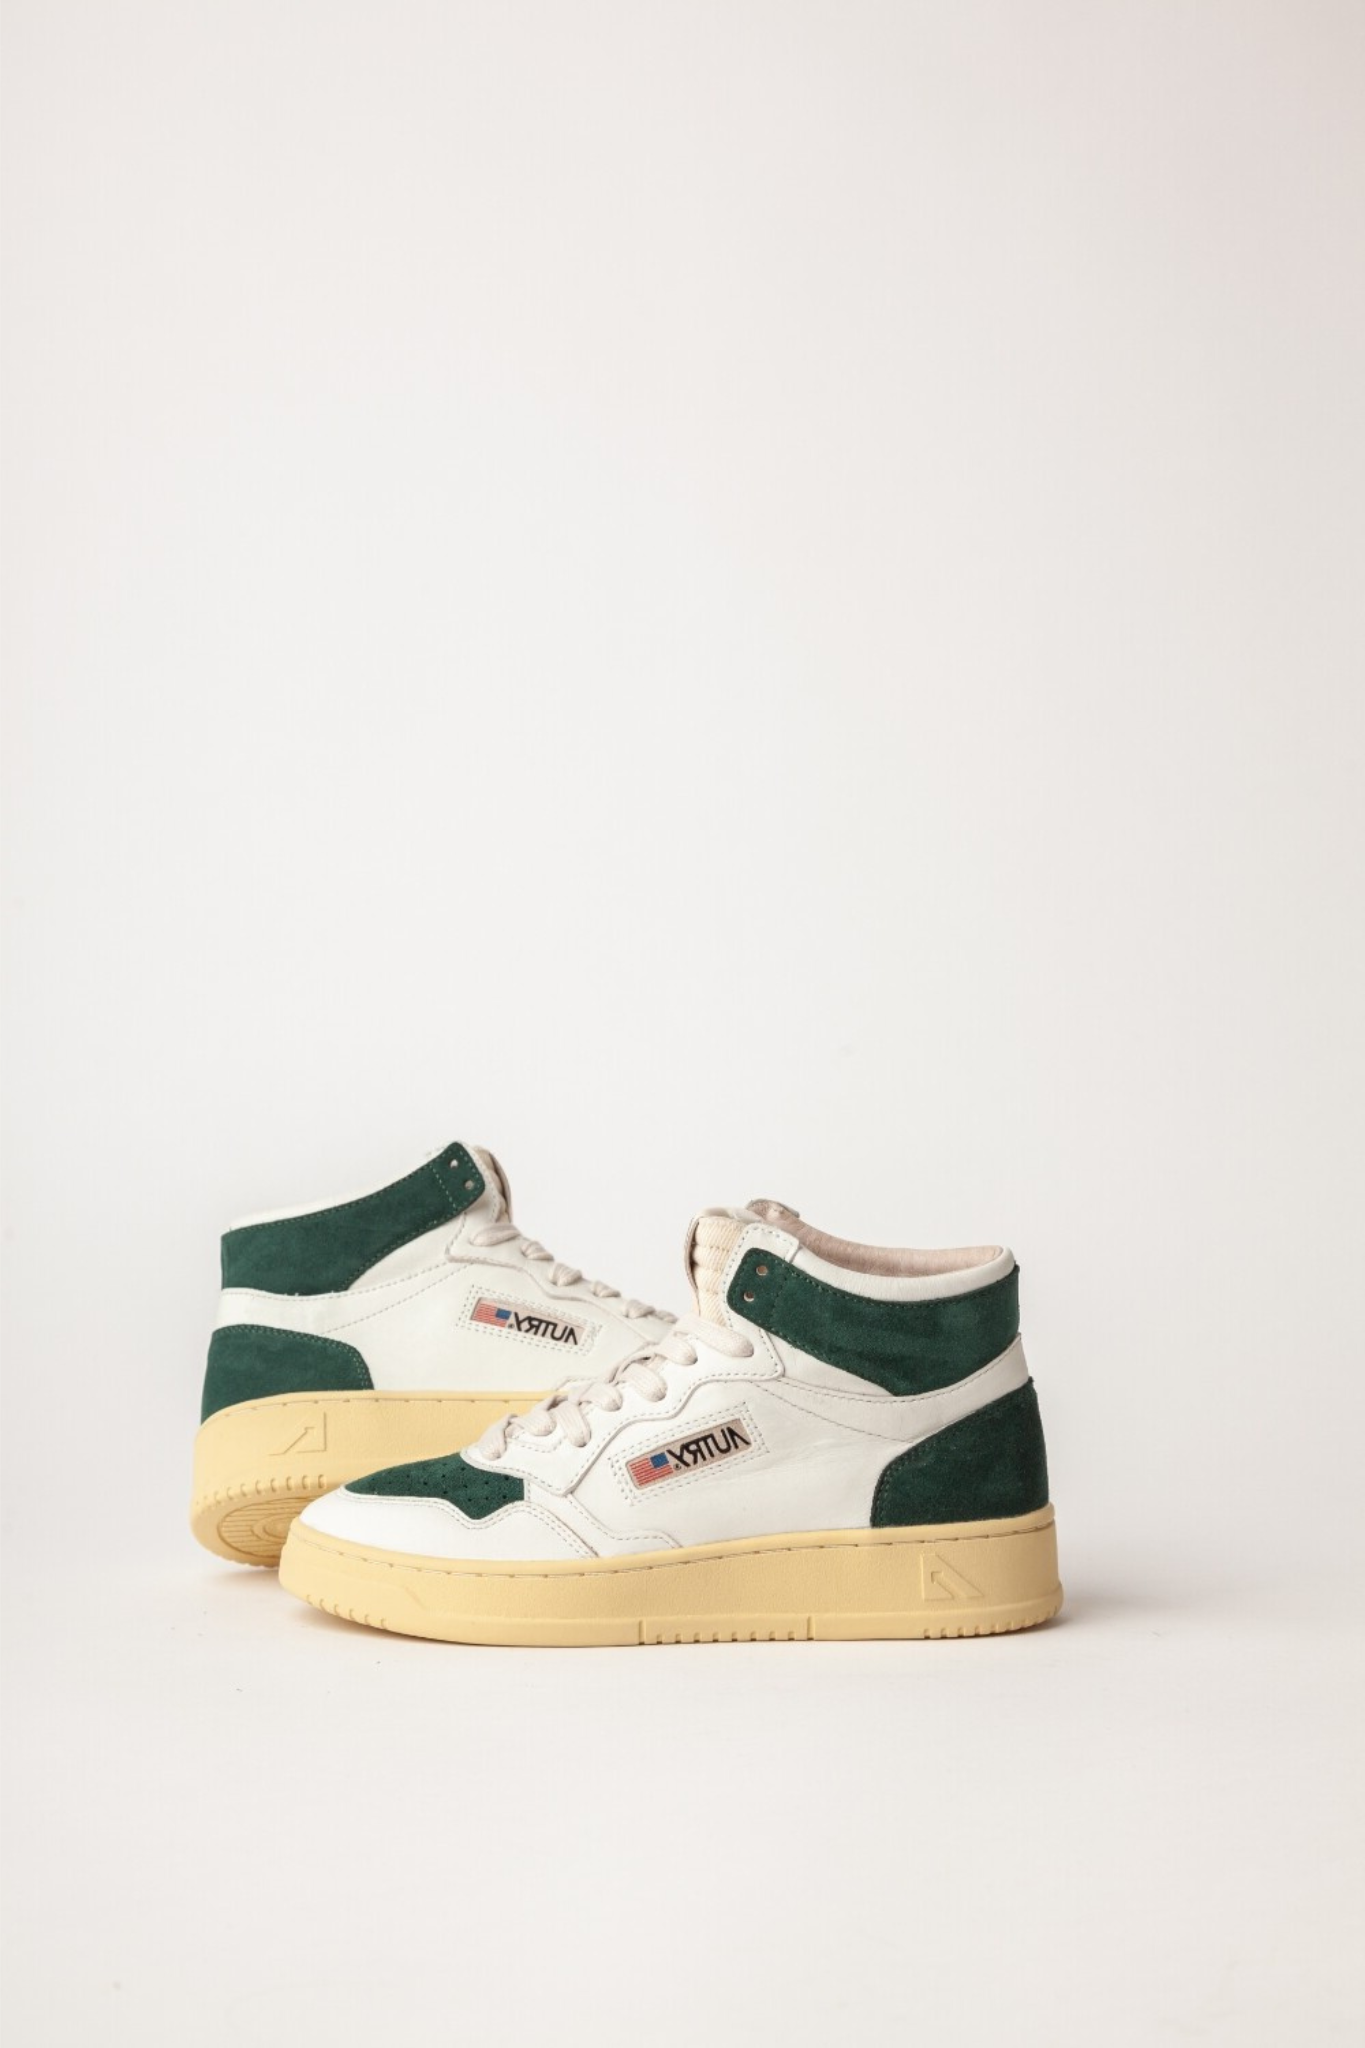 AUMW-SL09 - MEDALIST MID SNEAKERS IN LEATHER AND SUEDE COLOR WHITE AND BOTTLE